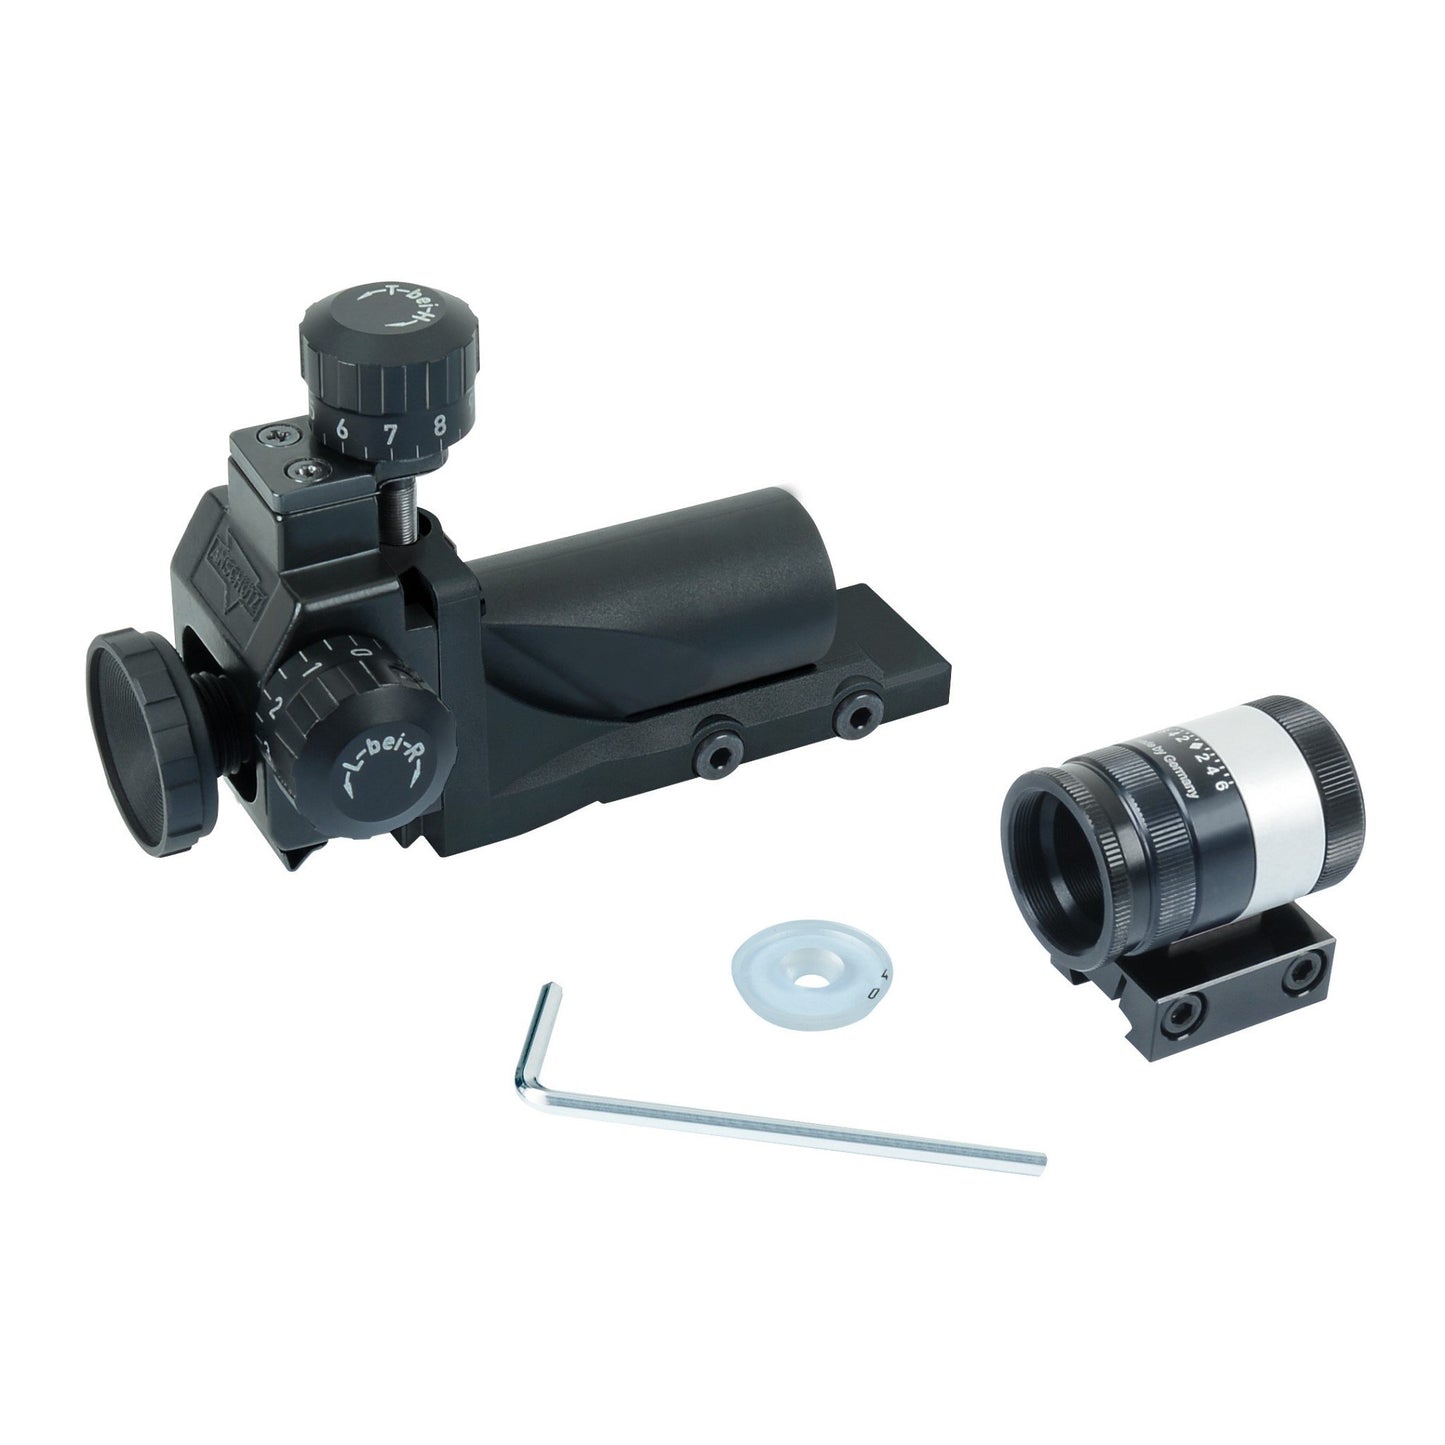 Anschutz 6834 Sight Set Complete with M22 Front Sight